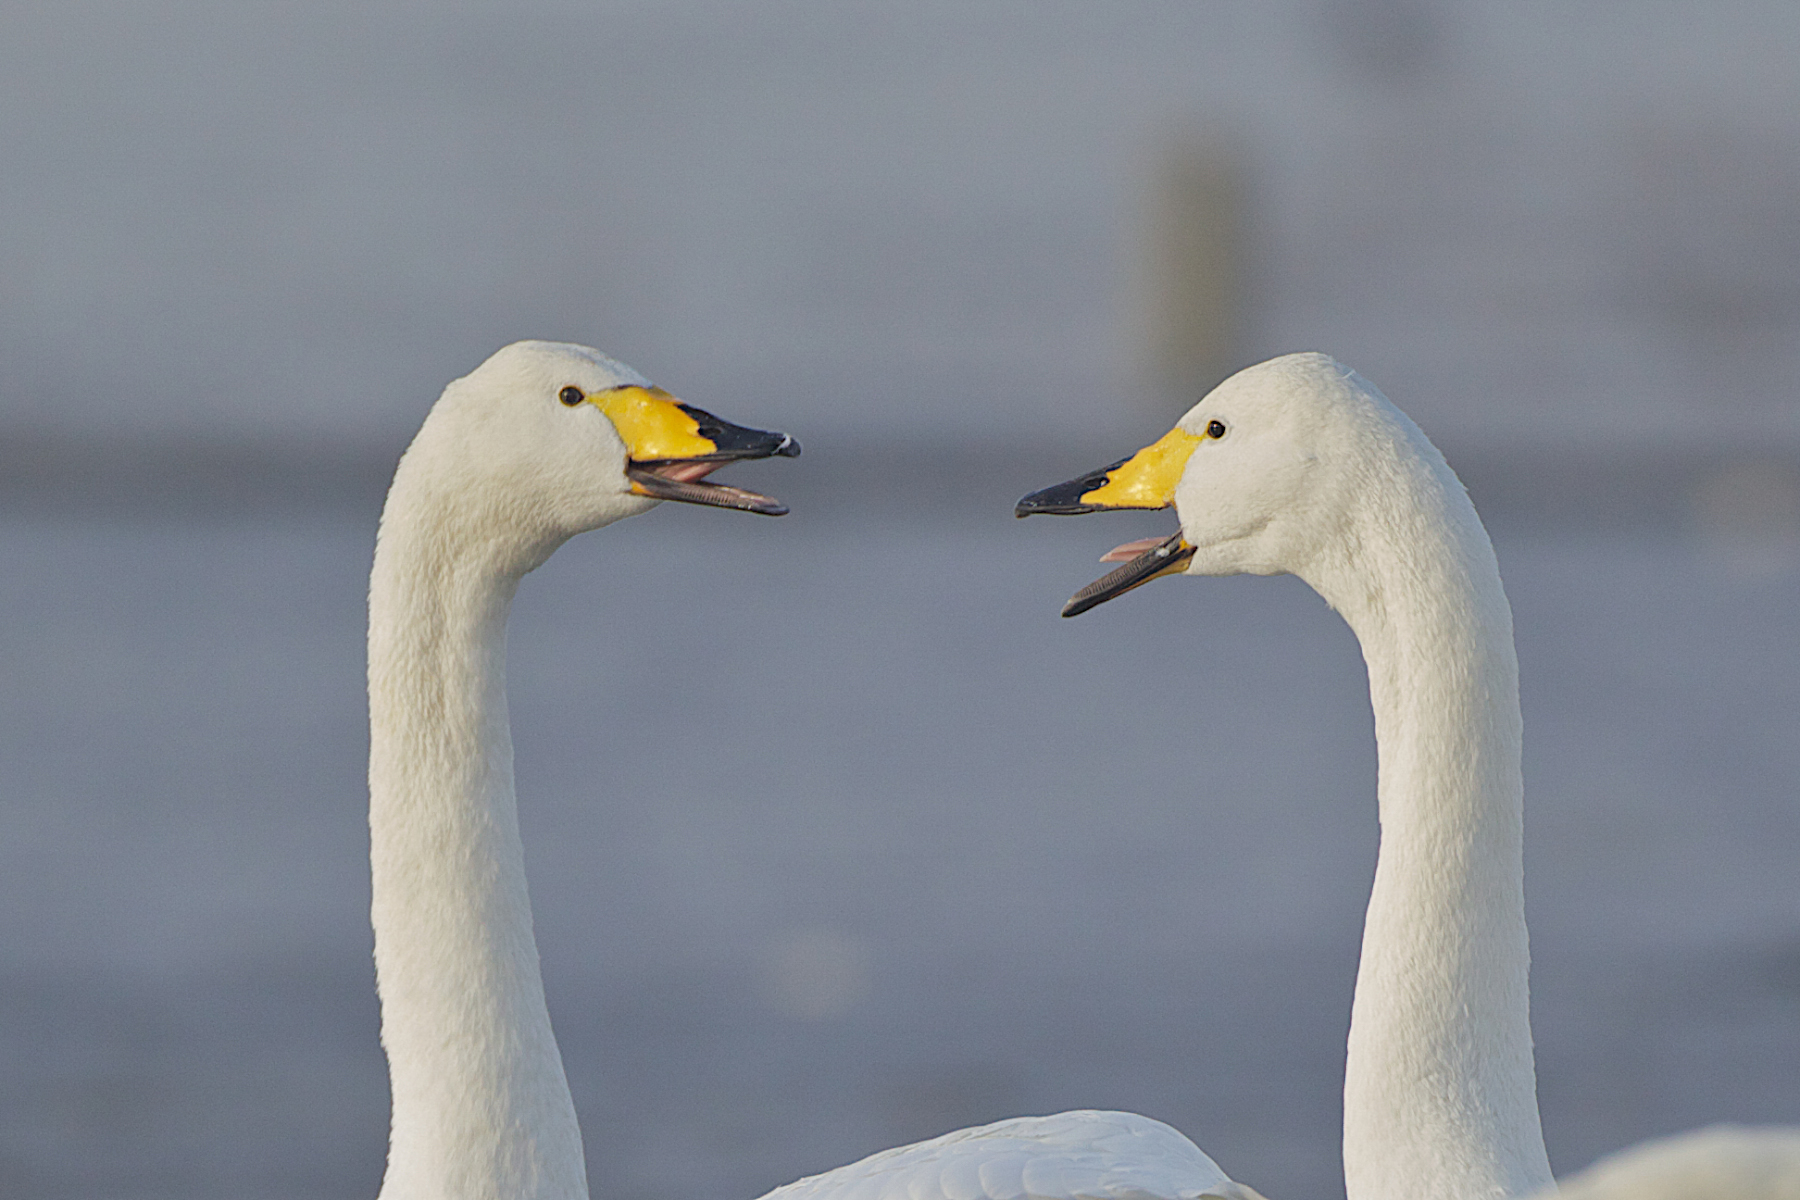 Whooper swans calling at the Welney Wetlands Centre (Wildfowl and Wetlands Trust/PA)